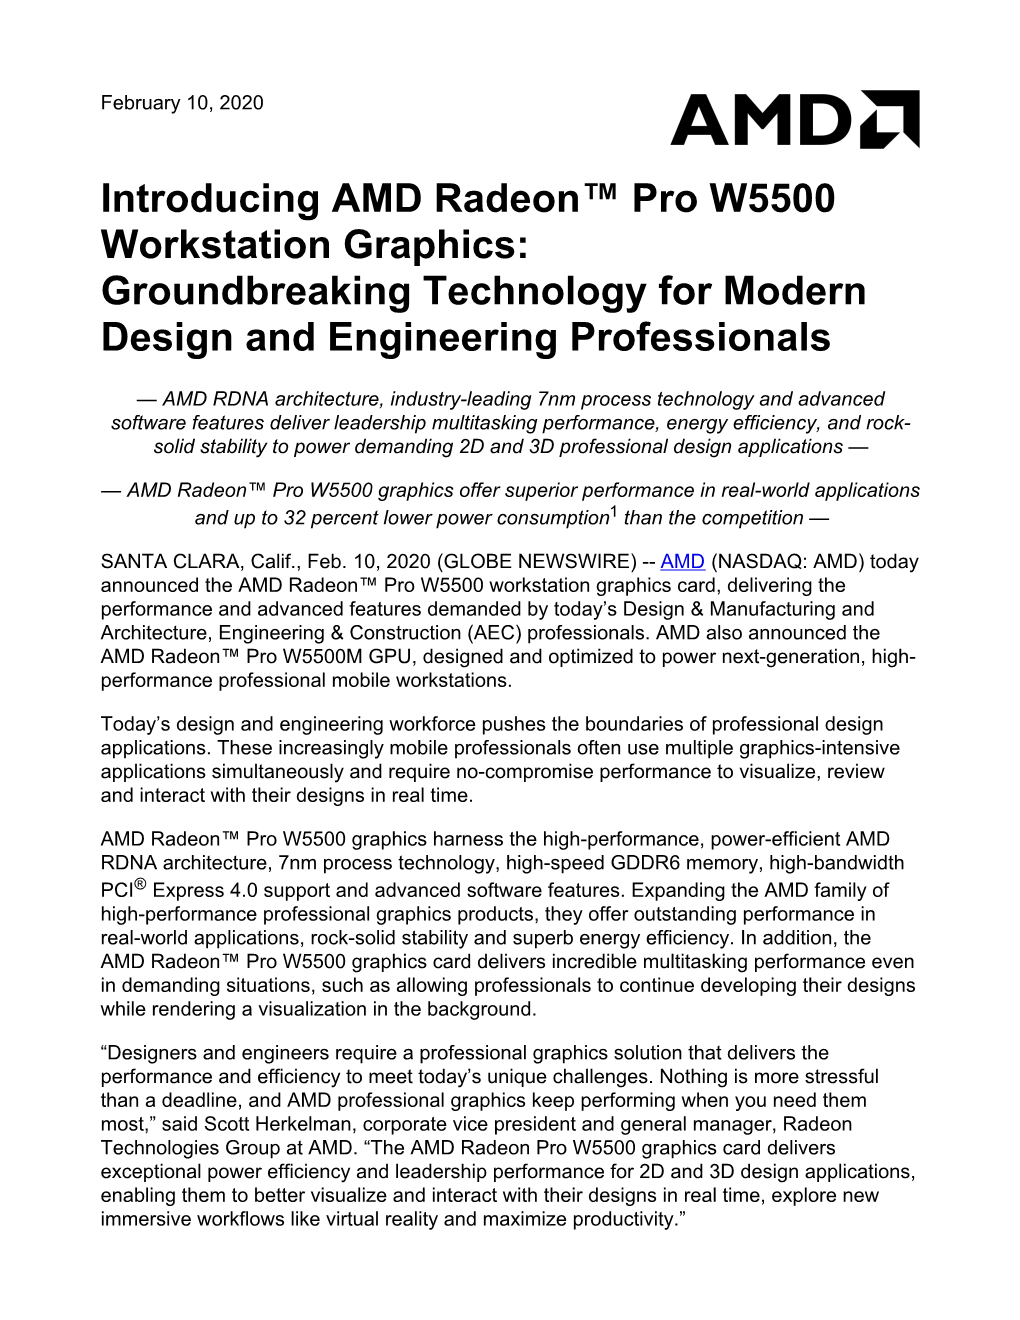 Introducing AMD Radeon™ Pro W5500 Workstation Graphics: Groundbreaking Technology for Modern Design and Engineering Professionals